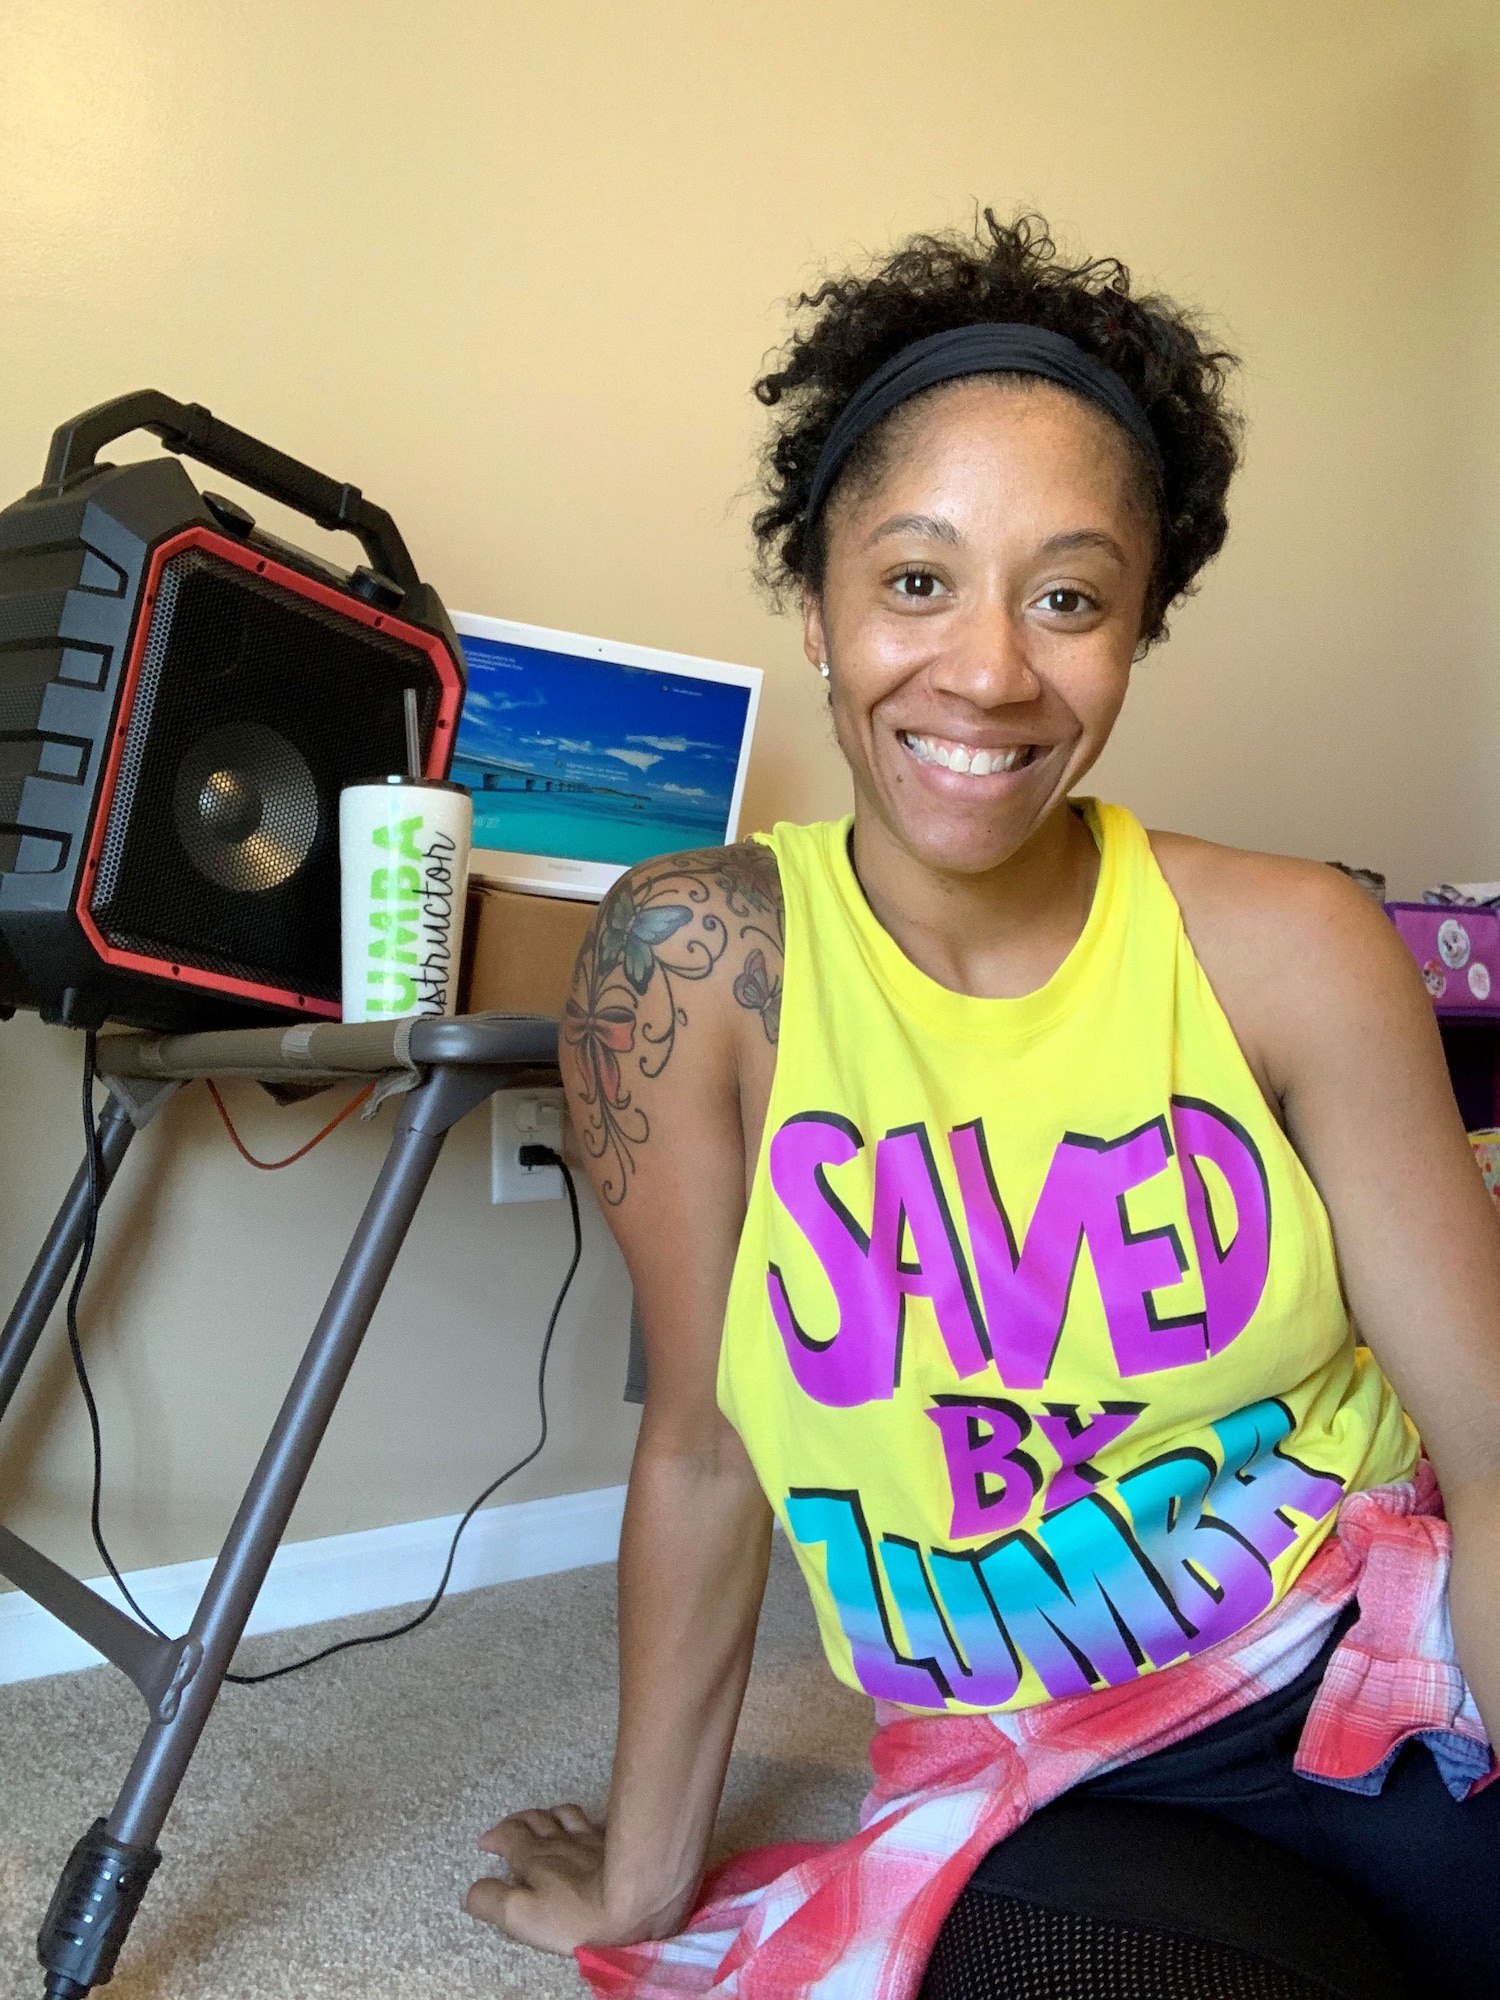 Photo shows a woman sitting in front of her tablet and music speaker smiling for the camera with the words, "Saved by Zumba" on her workout shirt.